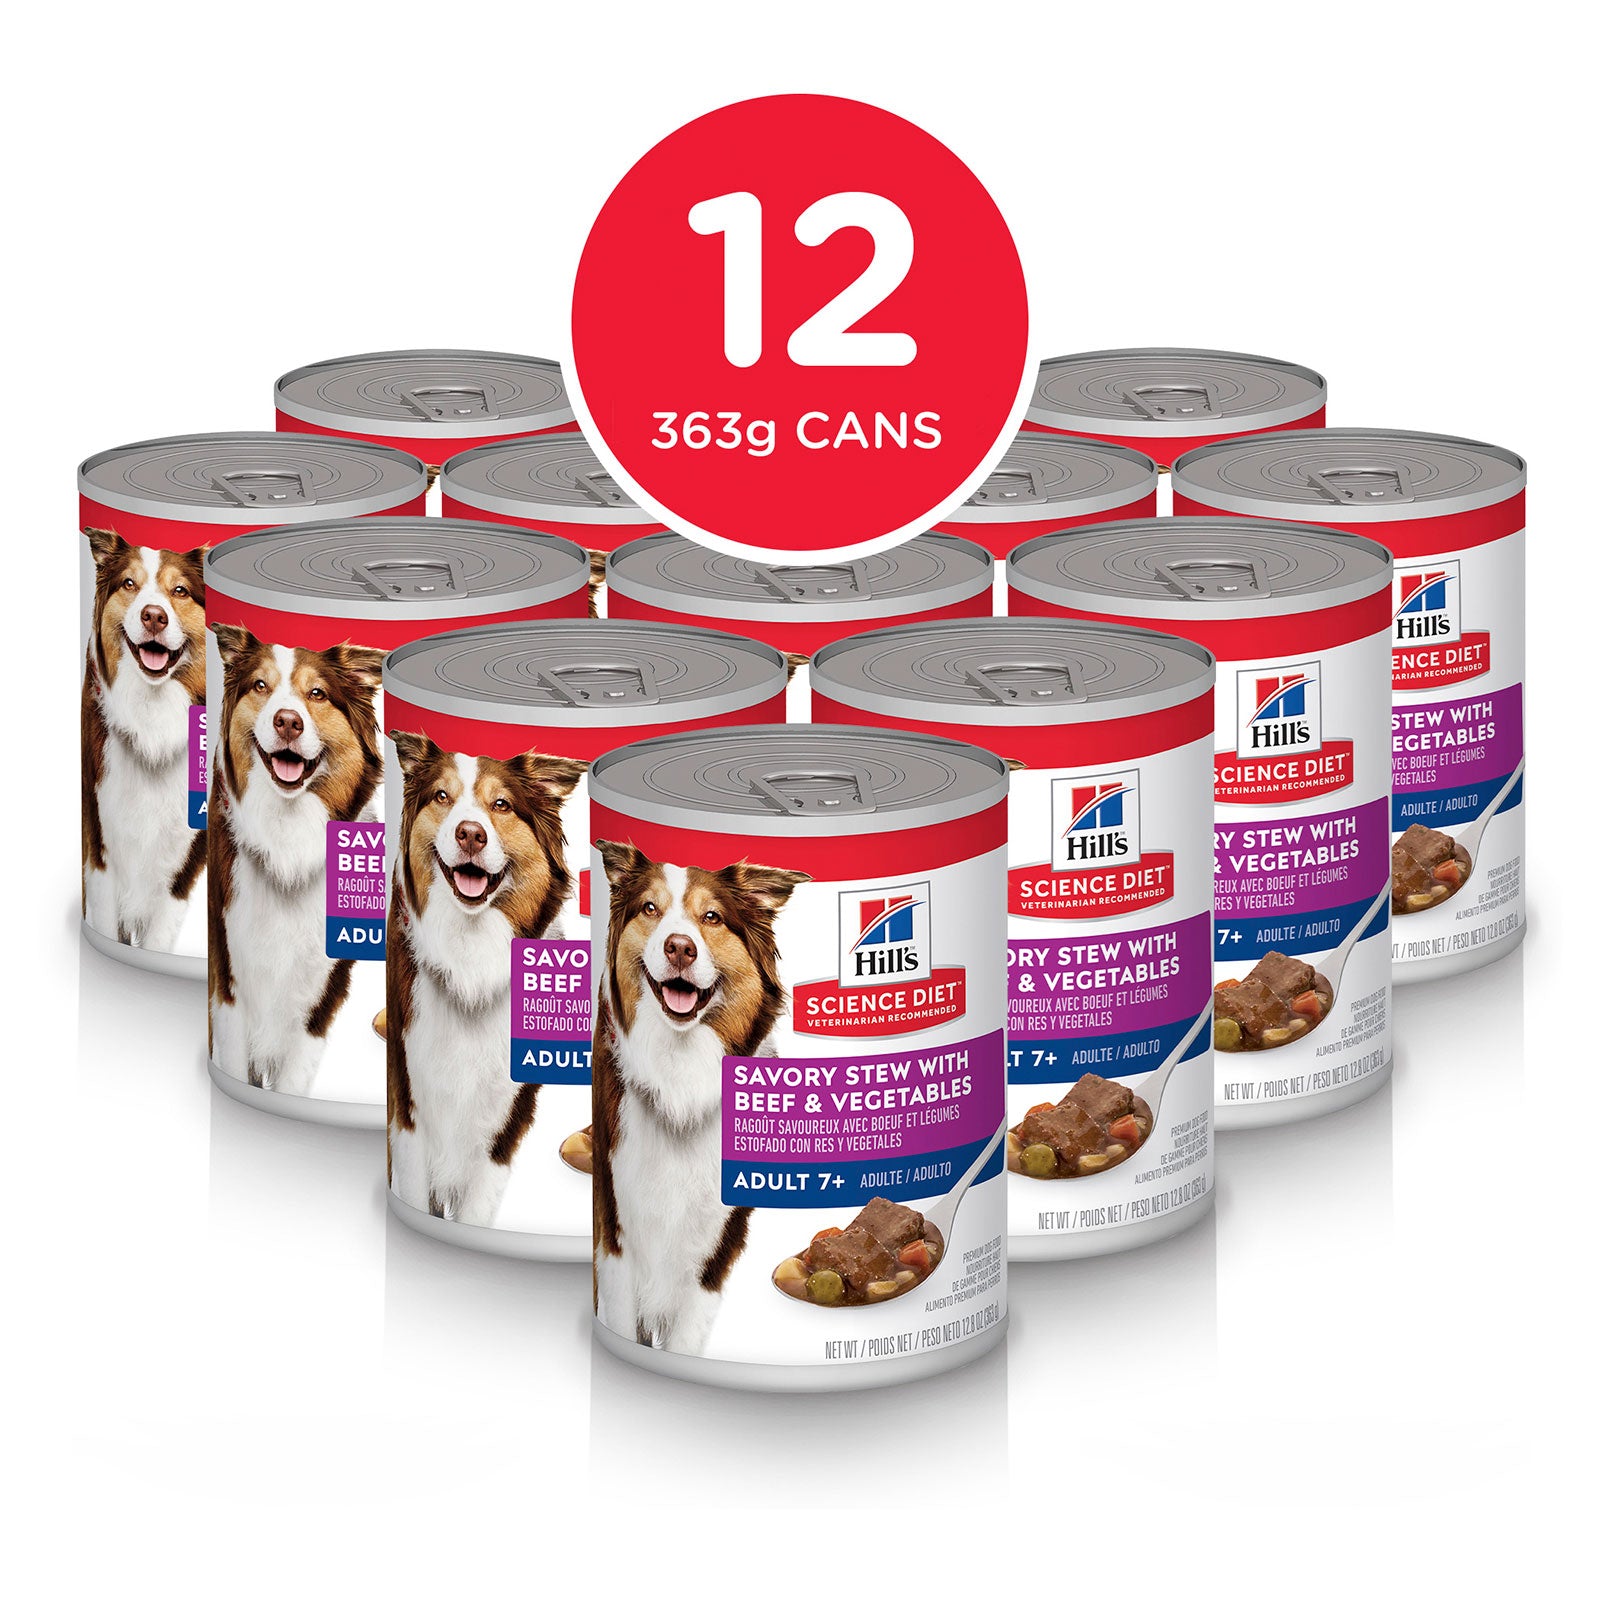 Hill's Science Diet Dog Food Can Adult 7+ Savoury Stew Beef & Vegetables